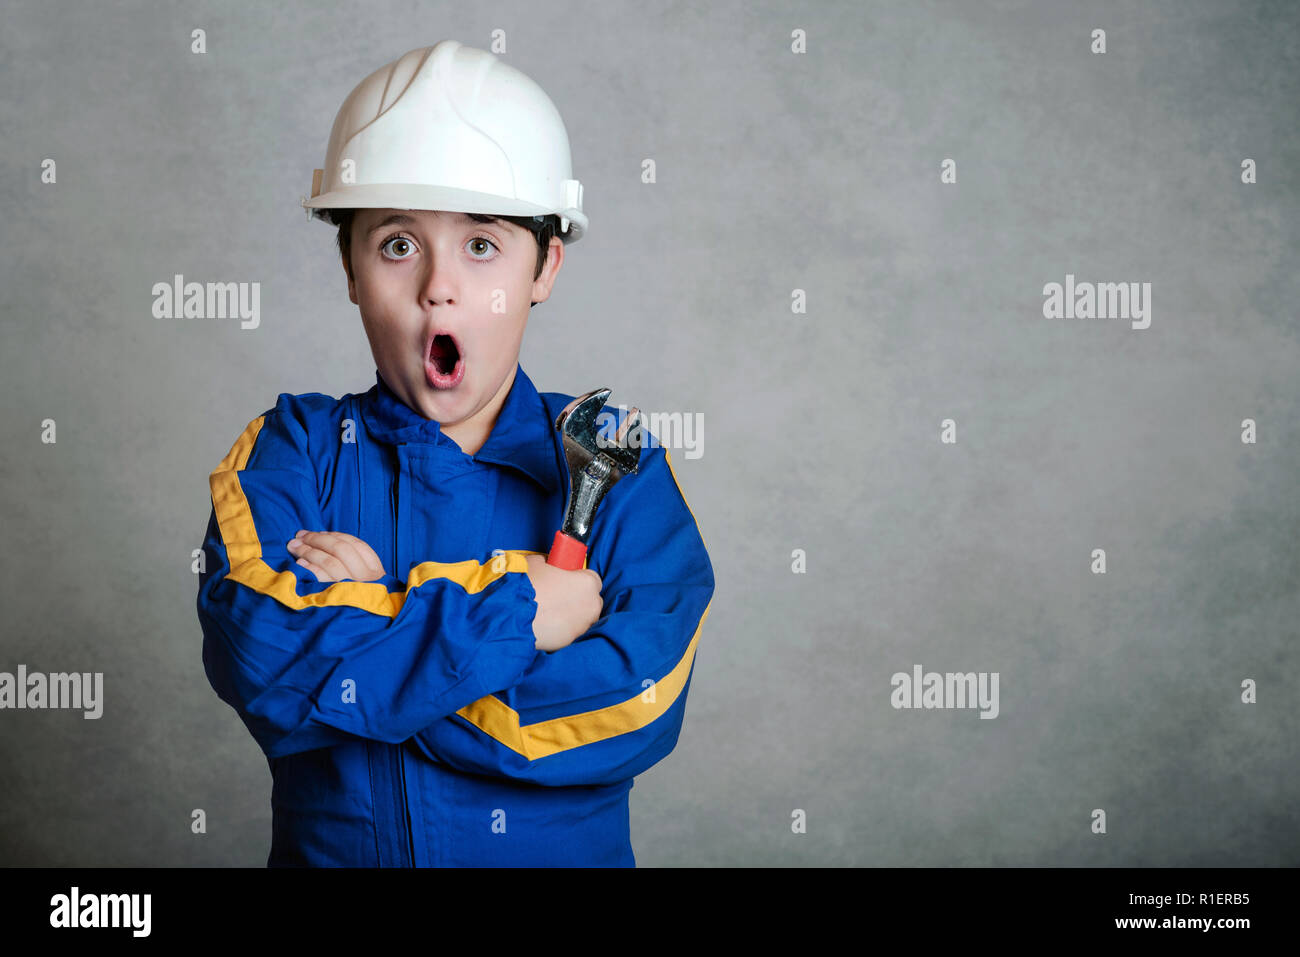 surprised child with a white helmet on gray background Stock Photo